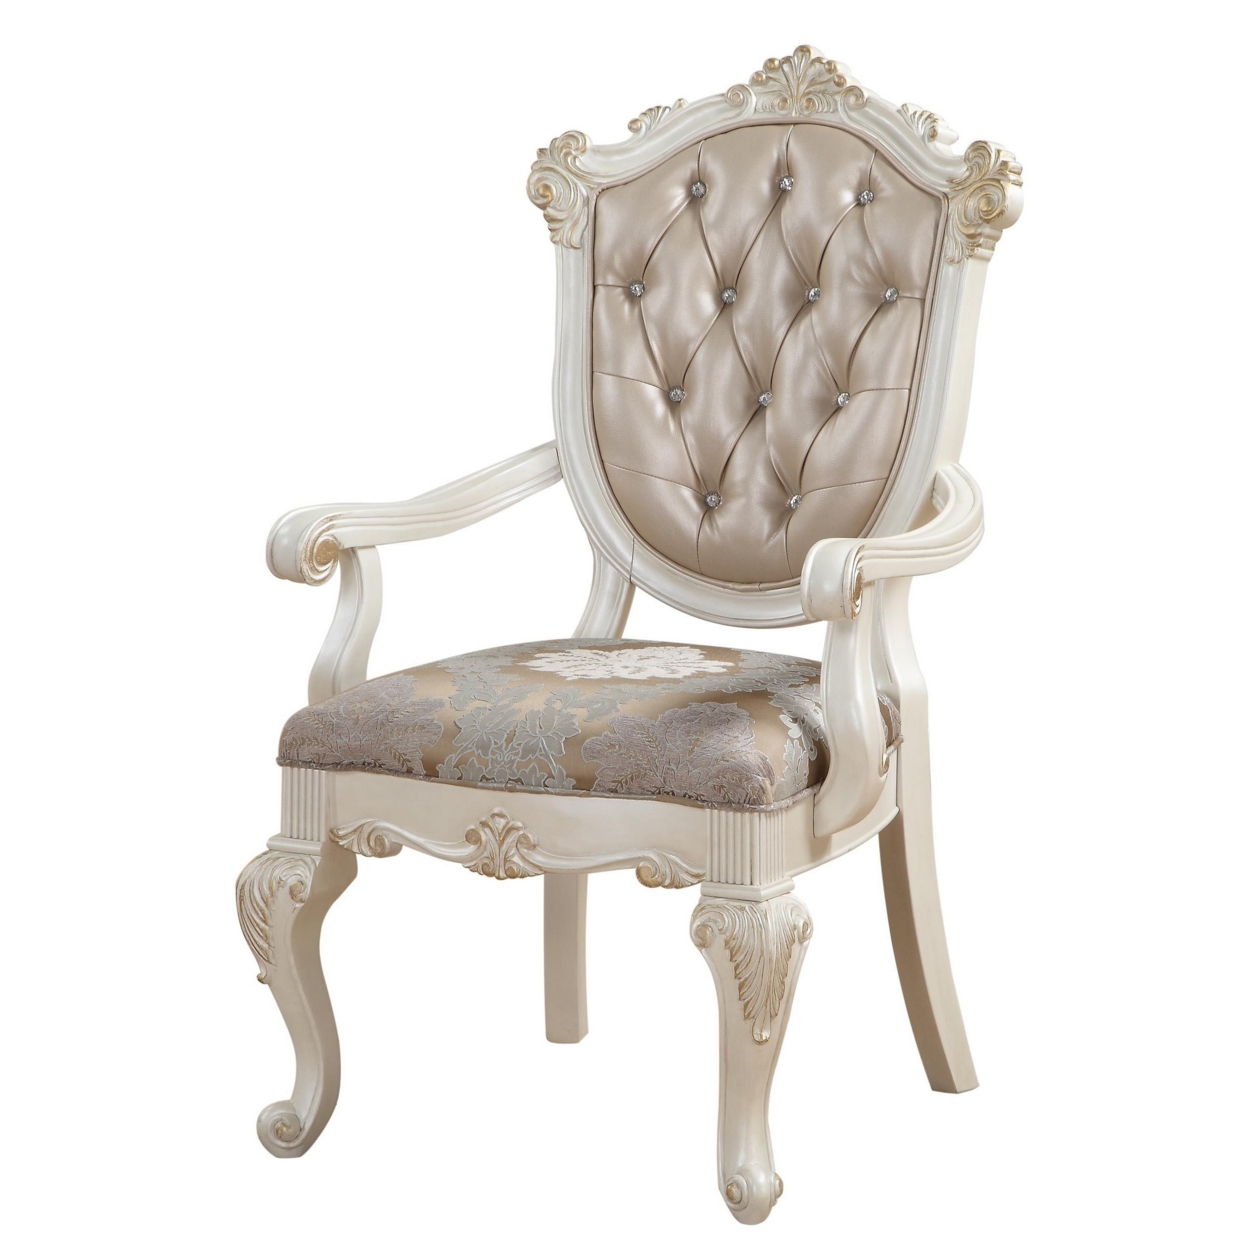 Wooden Arm Chair With Floral Patterned Padded Seat, Set Of 2,White And Gold- Saltoro Sherpi